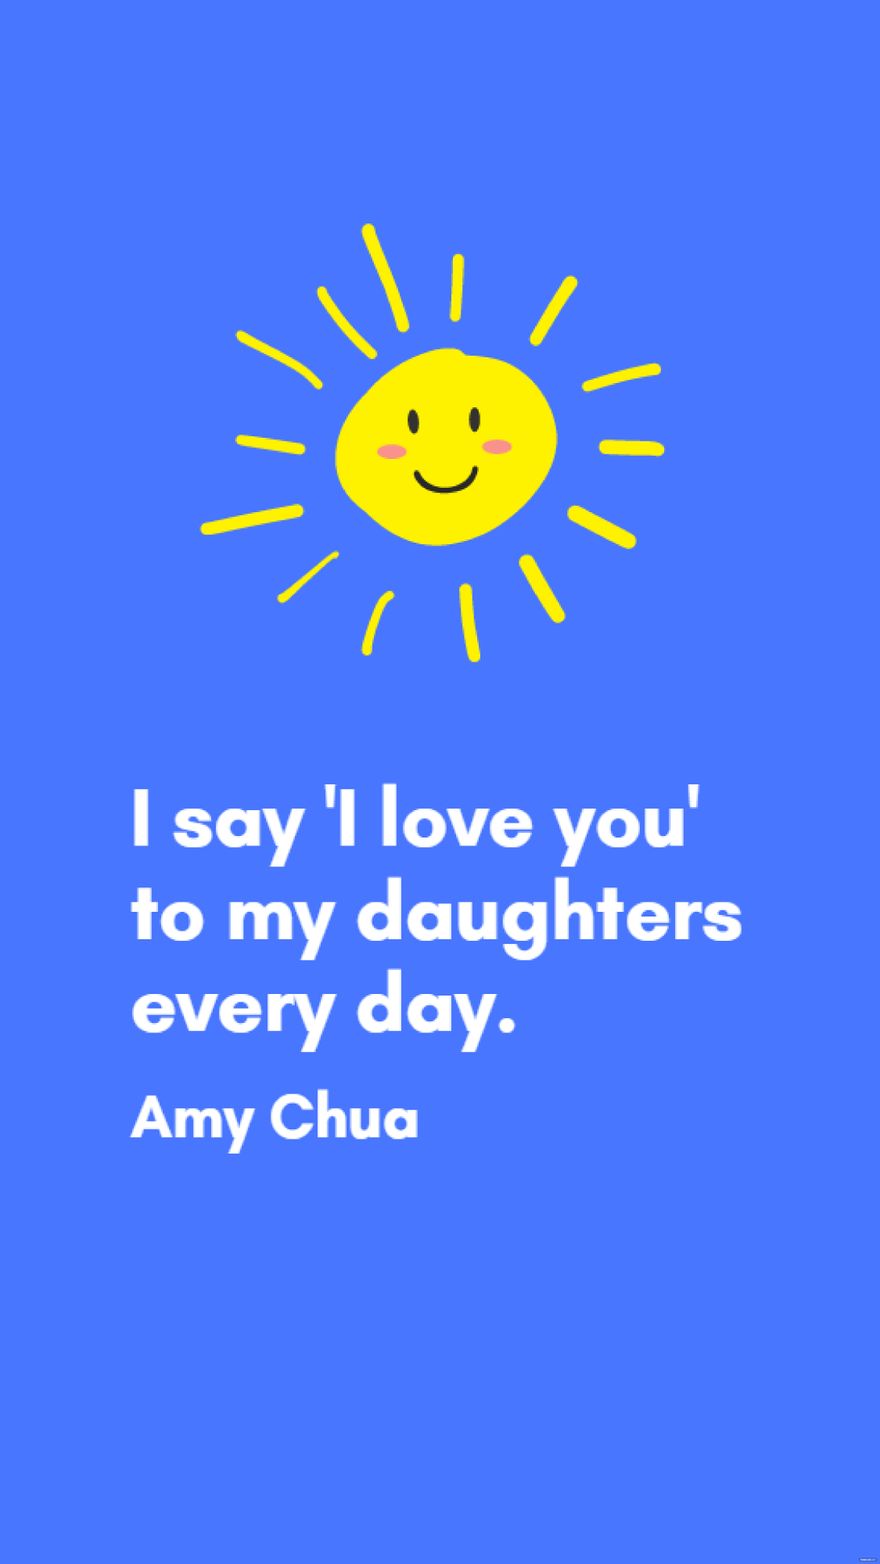 Amy Chua - I say 'I love you' to my daughters every day. in JPG